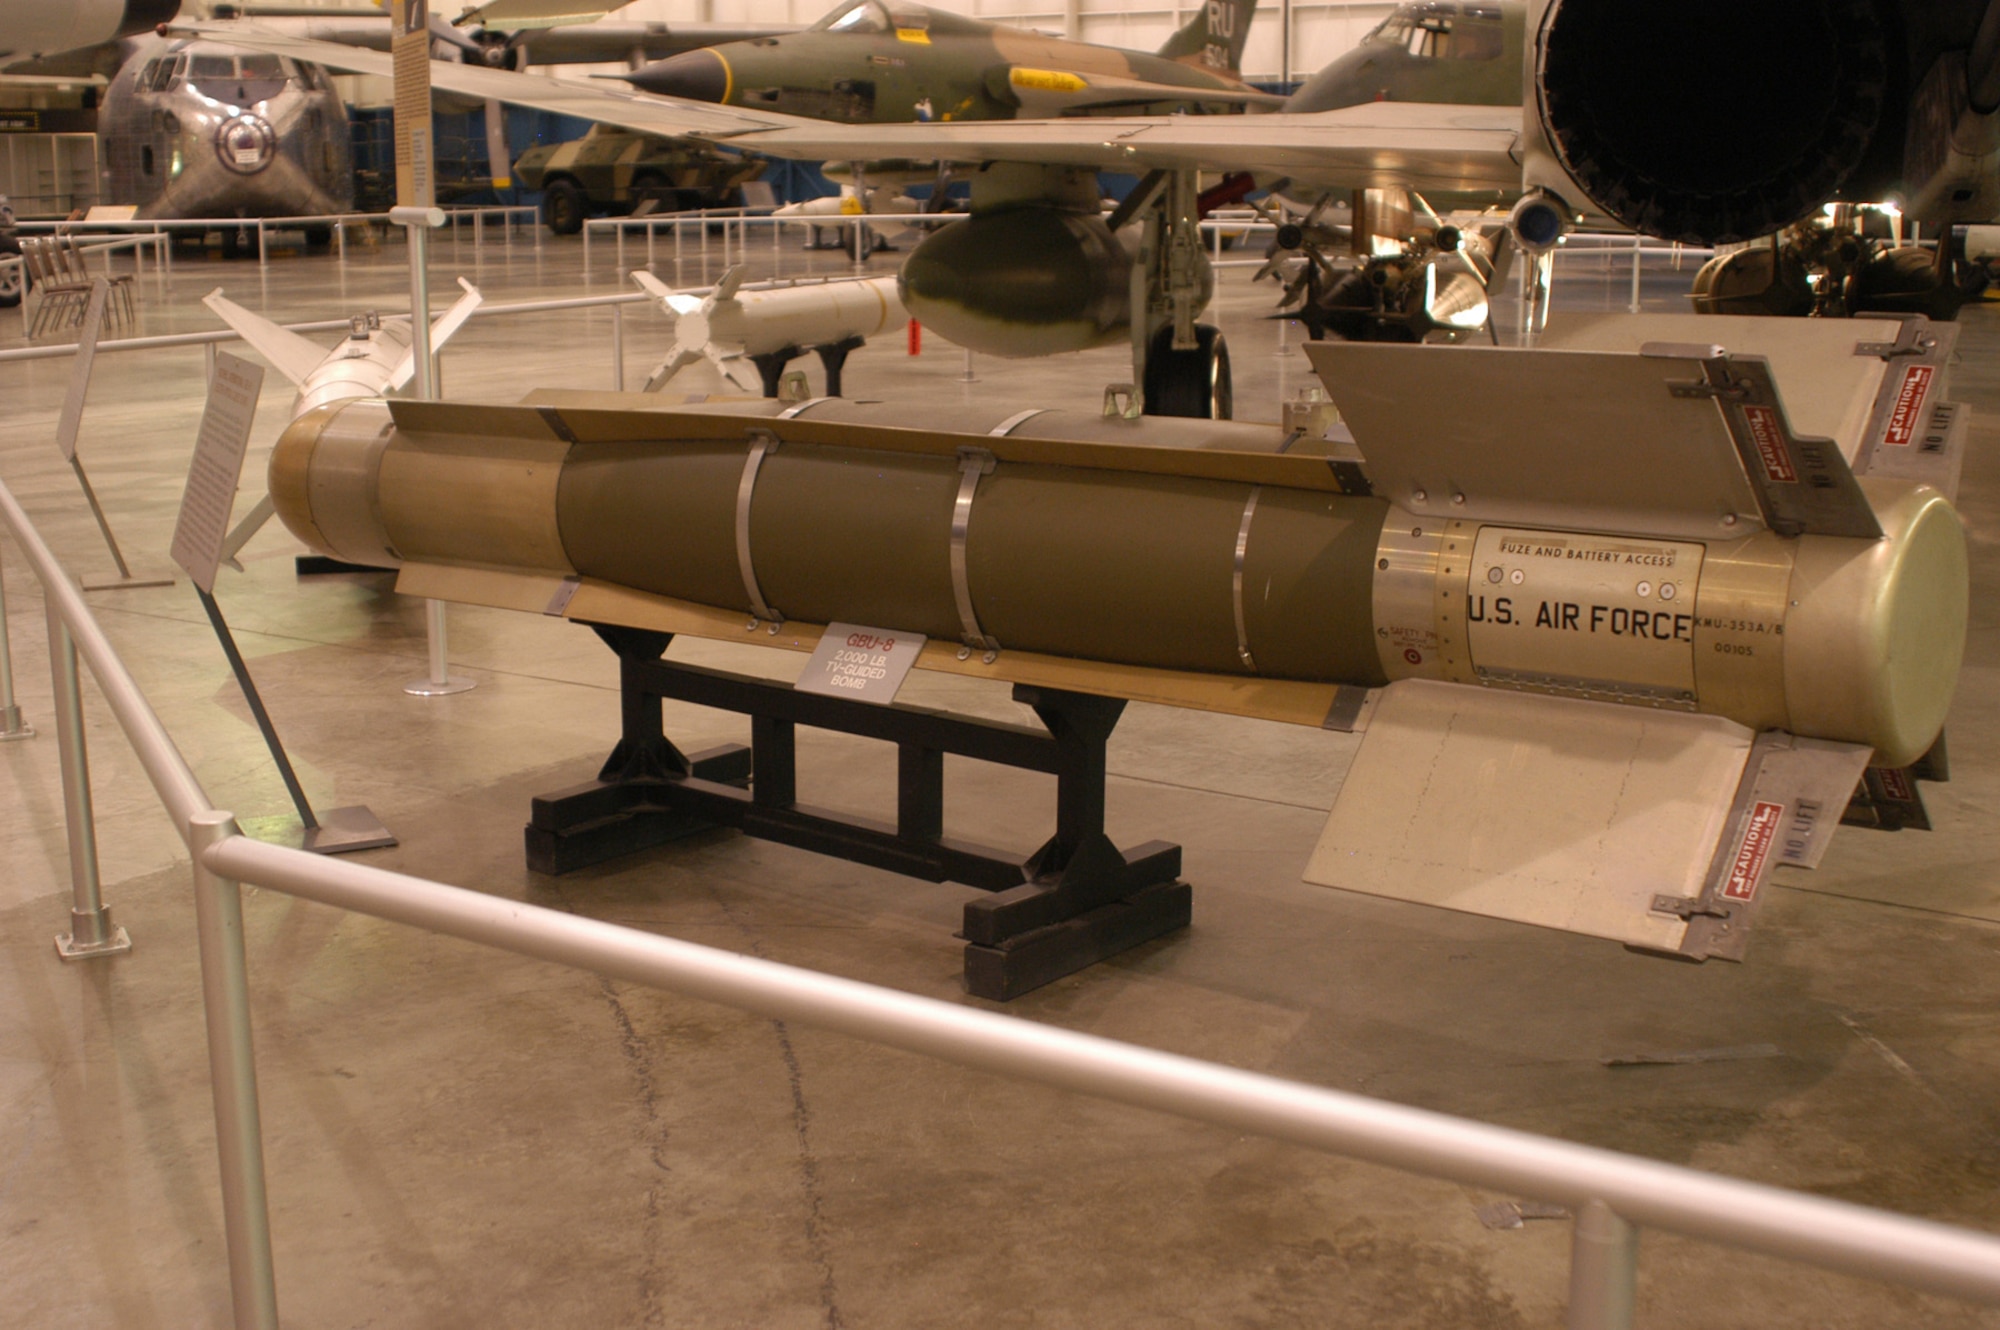 DAYTON, Ohio - Rockwell International GBU-8 Electro-Optical Guided Bomb on display at the National Museum of the U.S. Air Force. (U.S. Air Force photo)